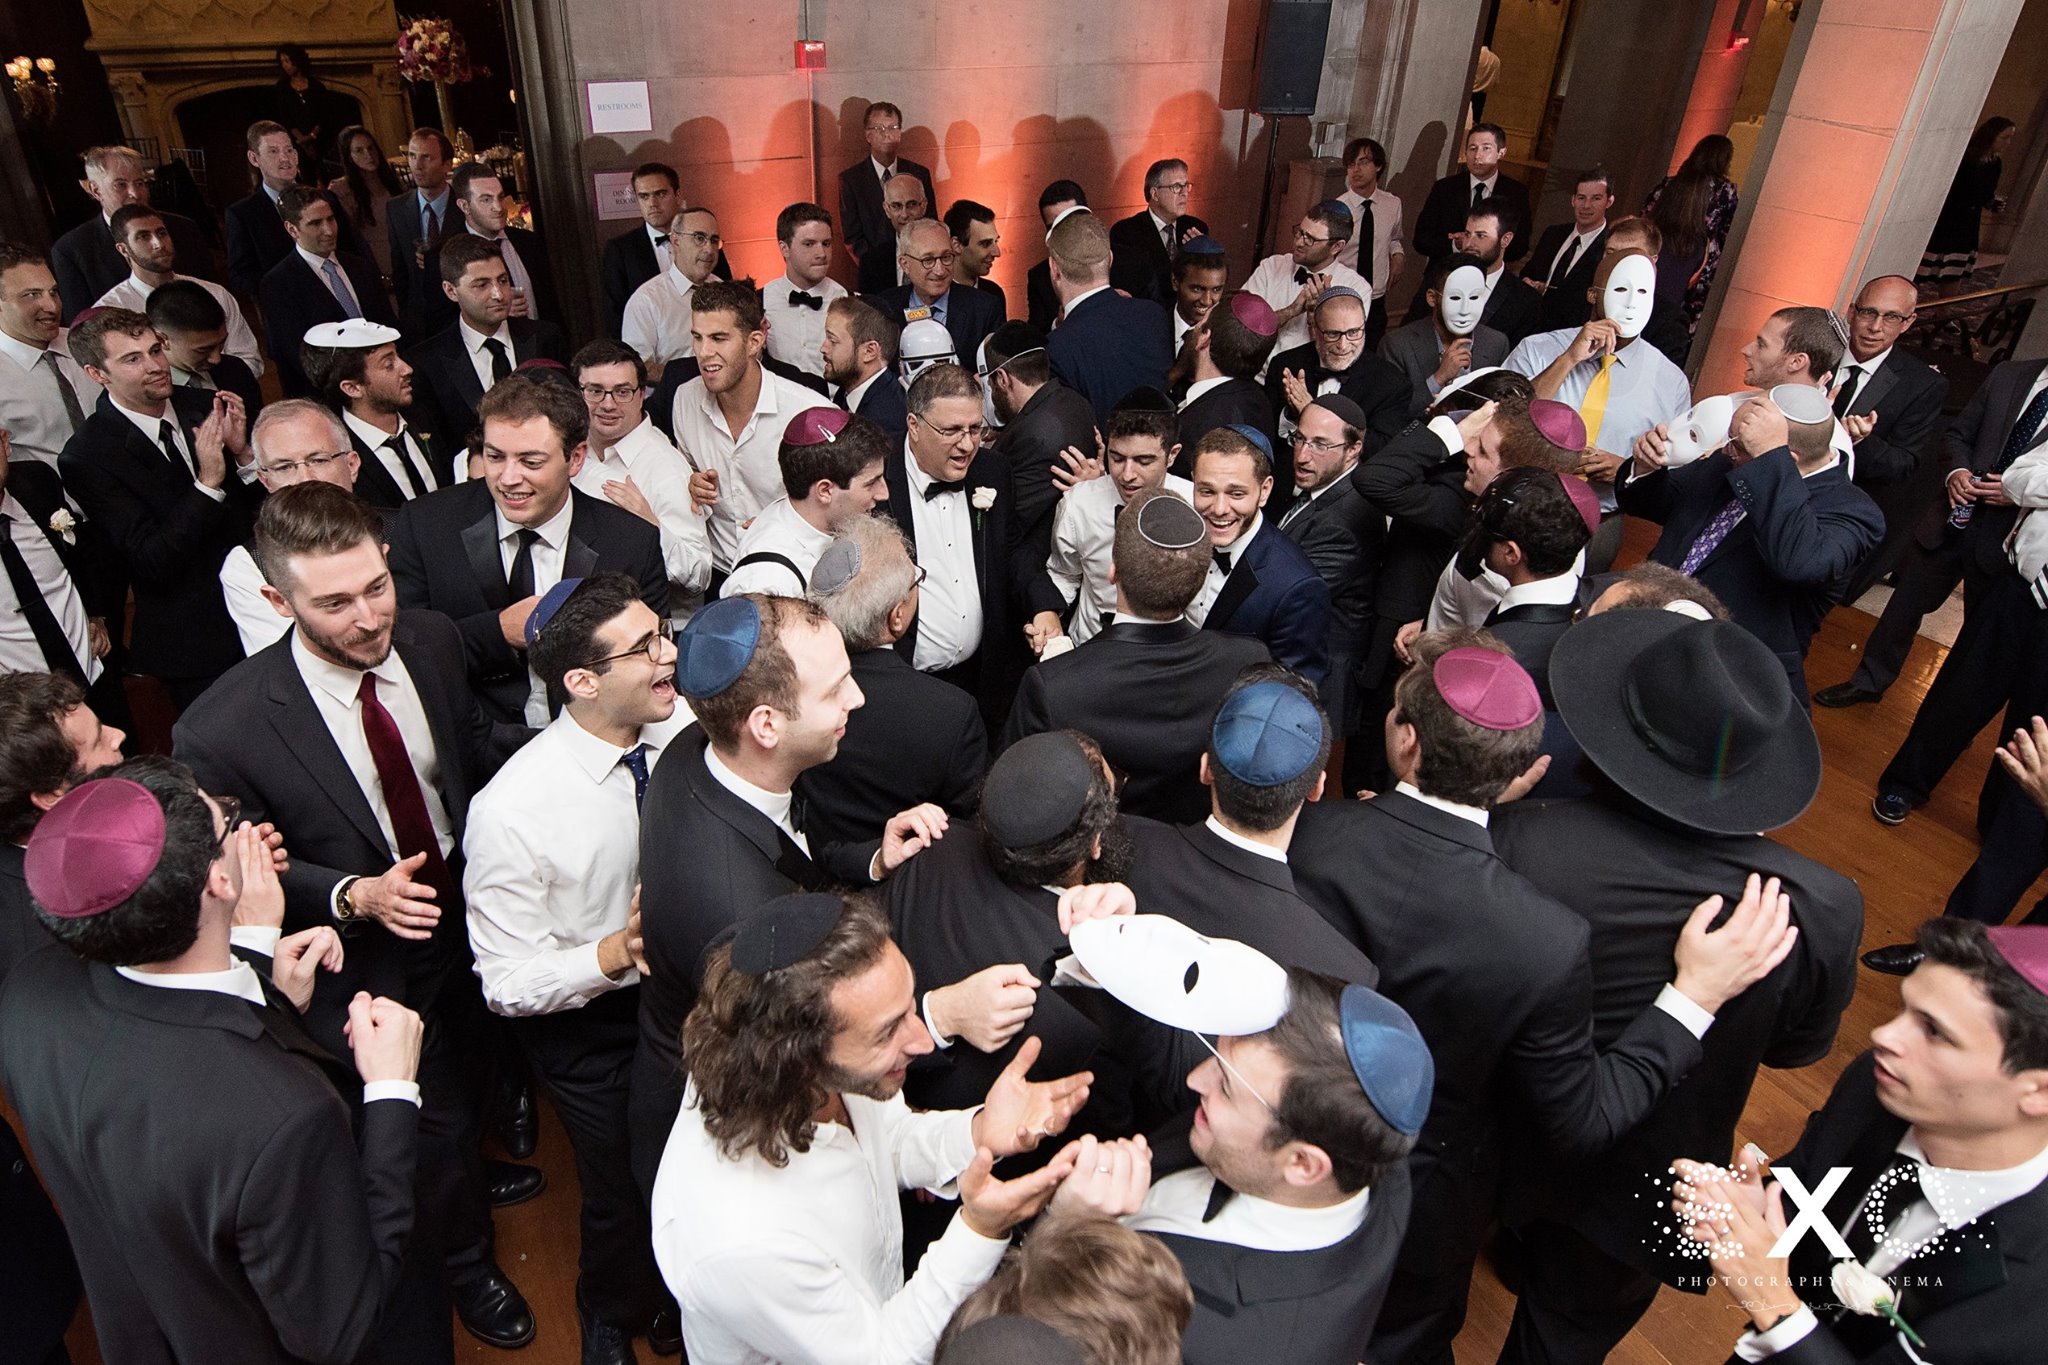 wedding guests and wedding party dancing at Hempstead House reception to Nafshenu music